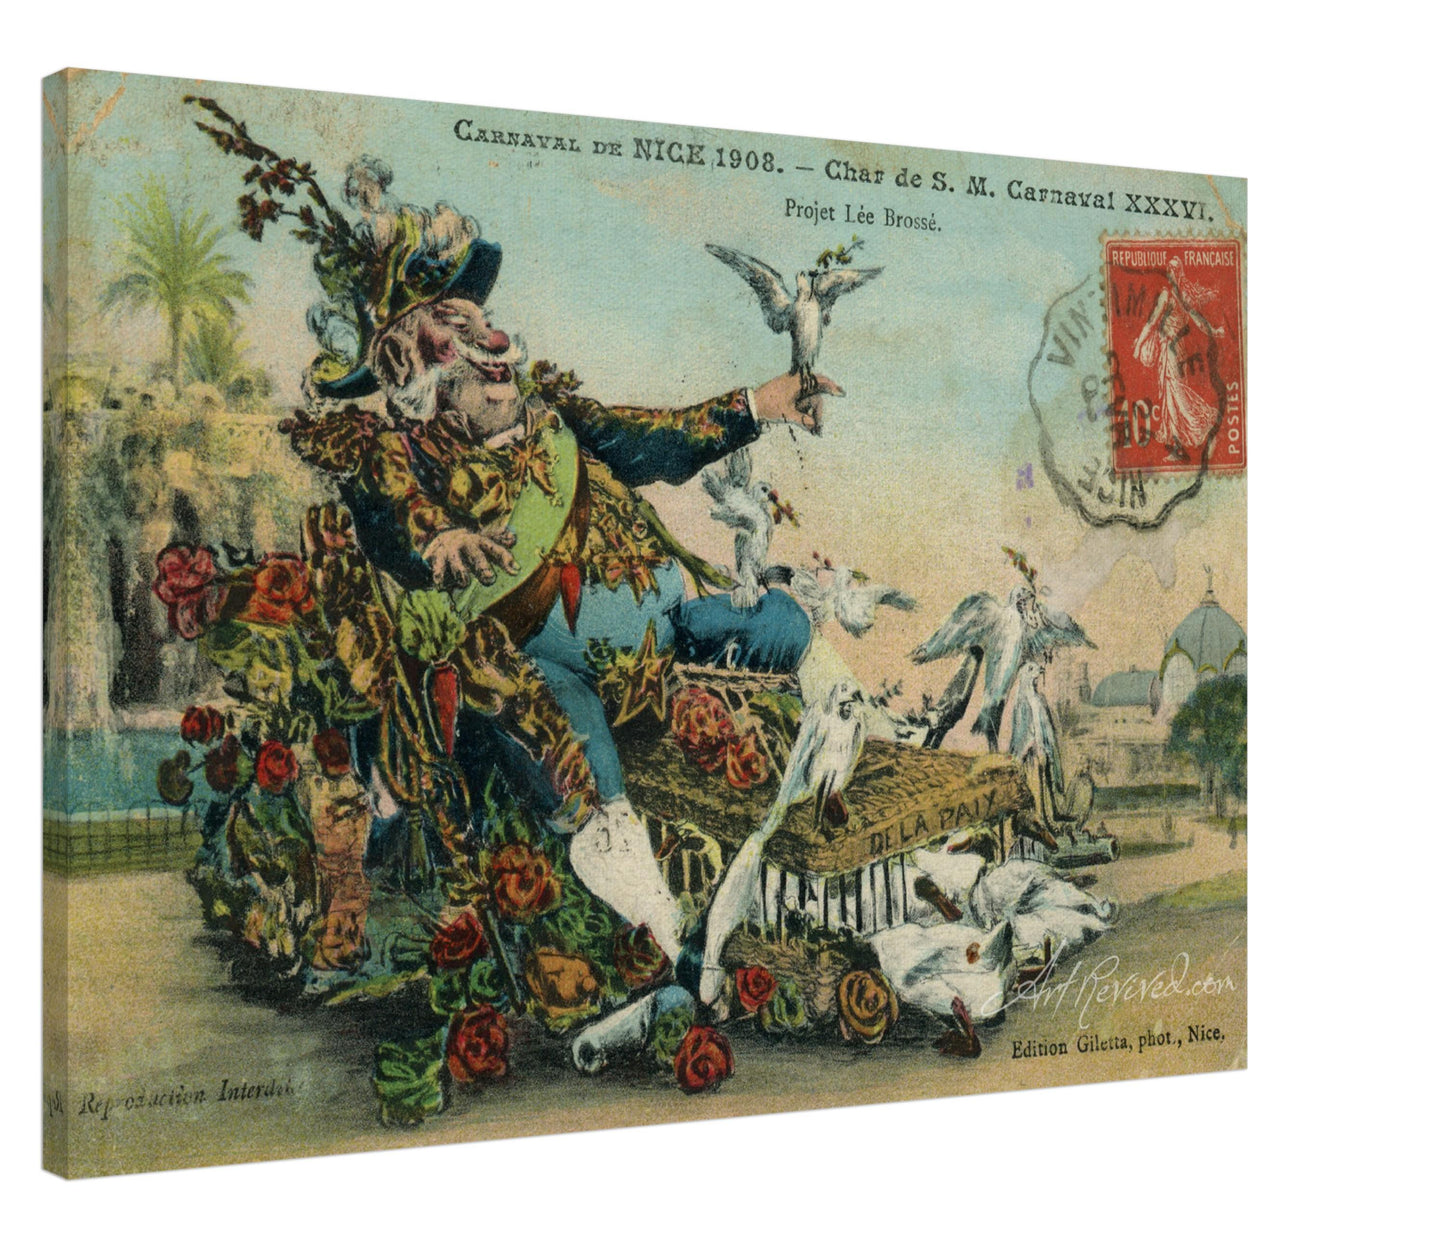 Vintage Wall Art Canvas - 36th Carnaval de Nice 1908 (Mailed 02-26-1908)